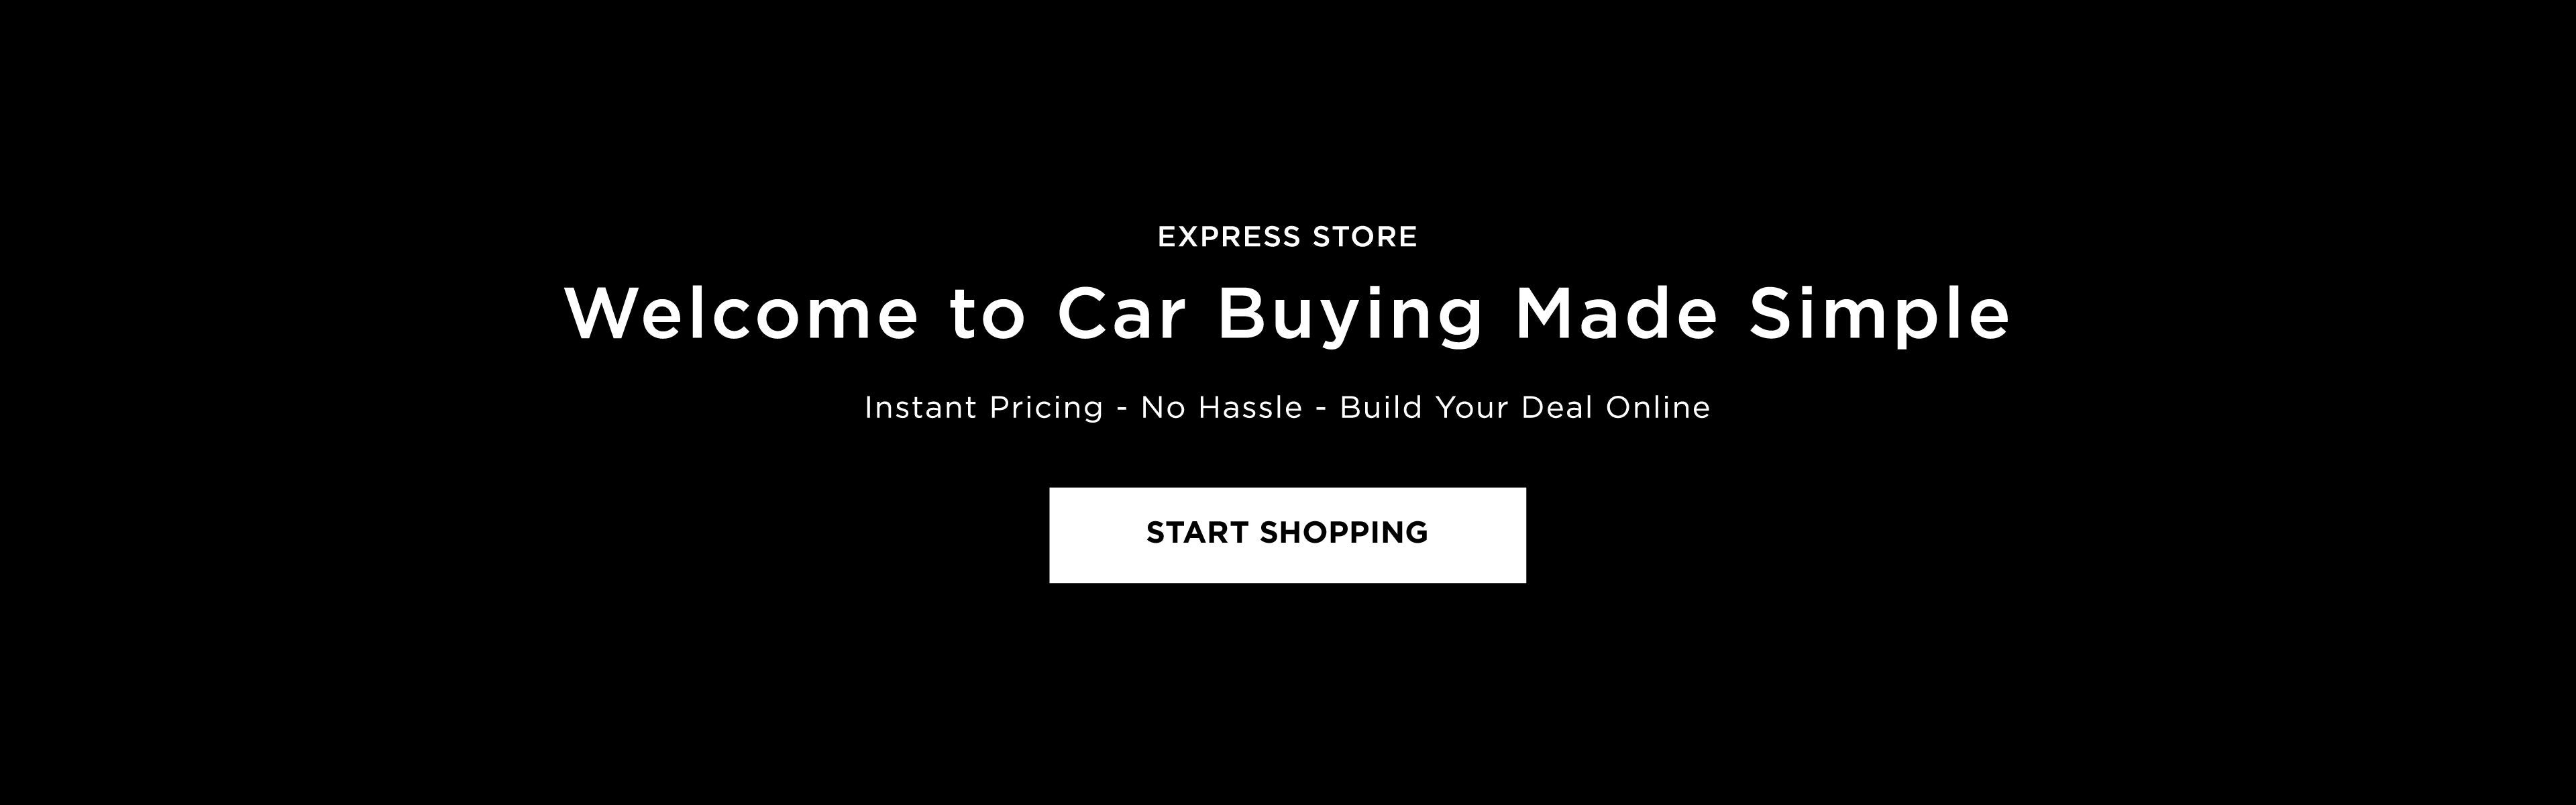 express store - welcome to car buying made simple